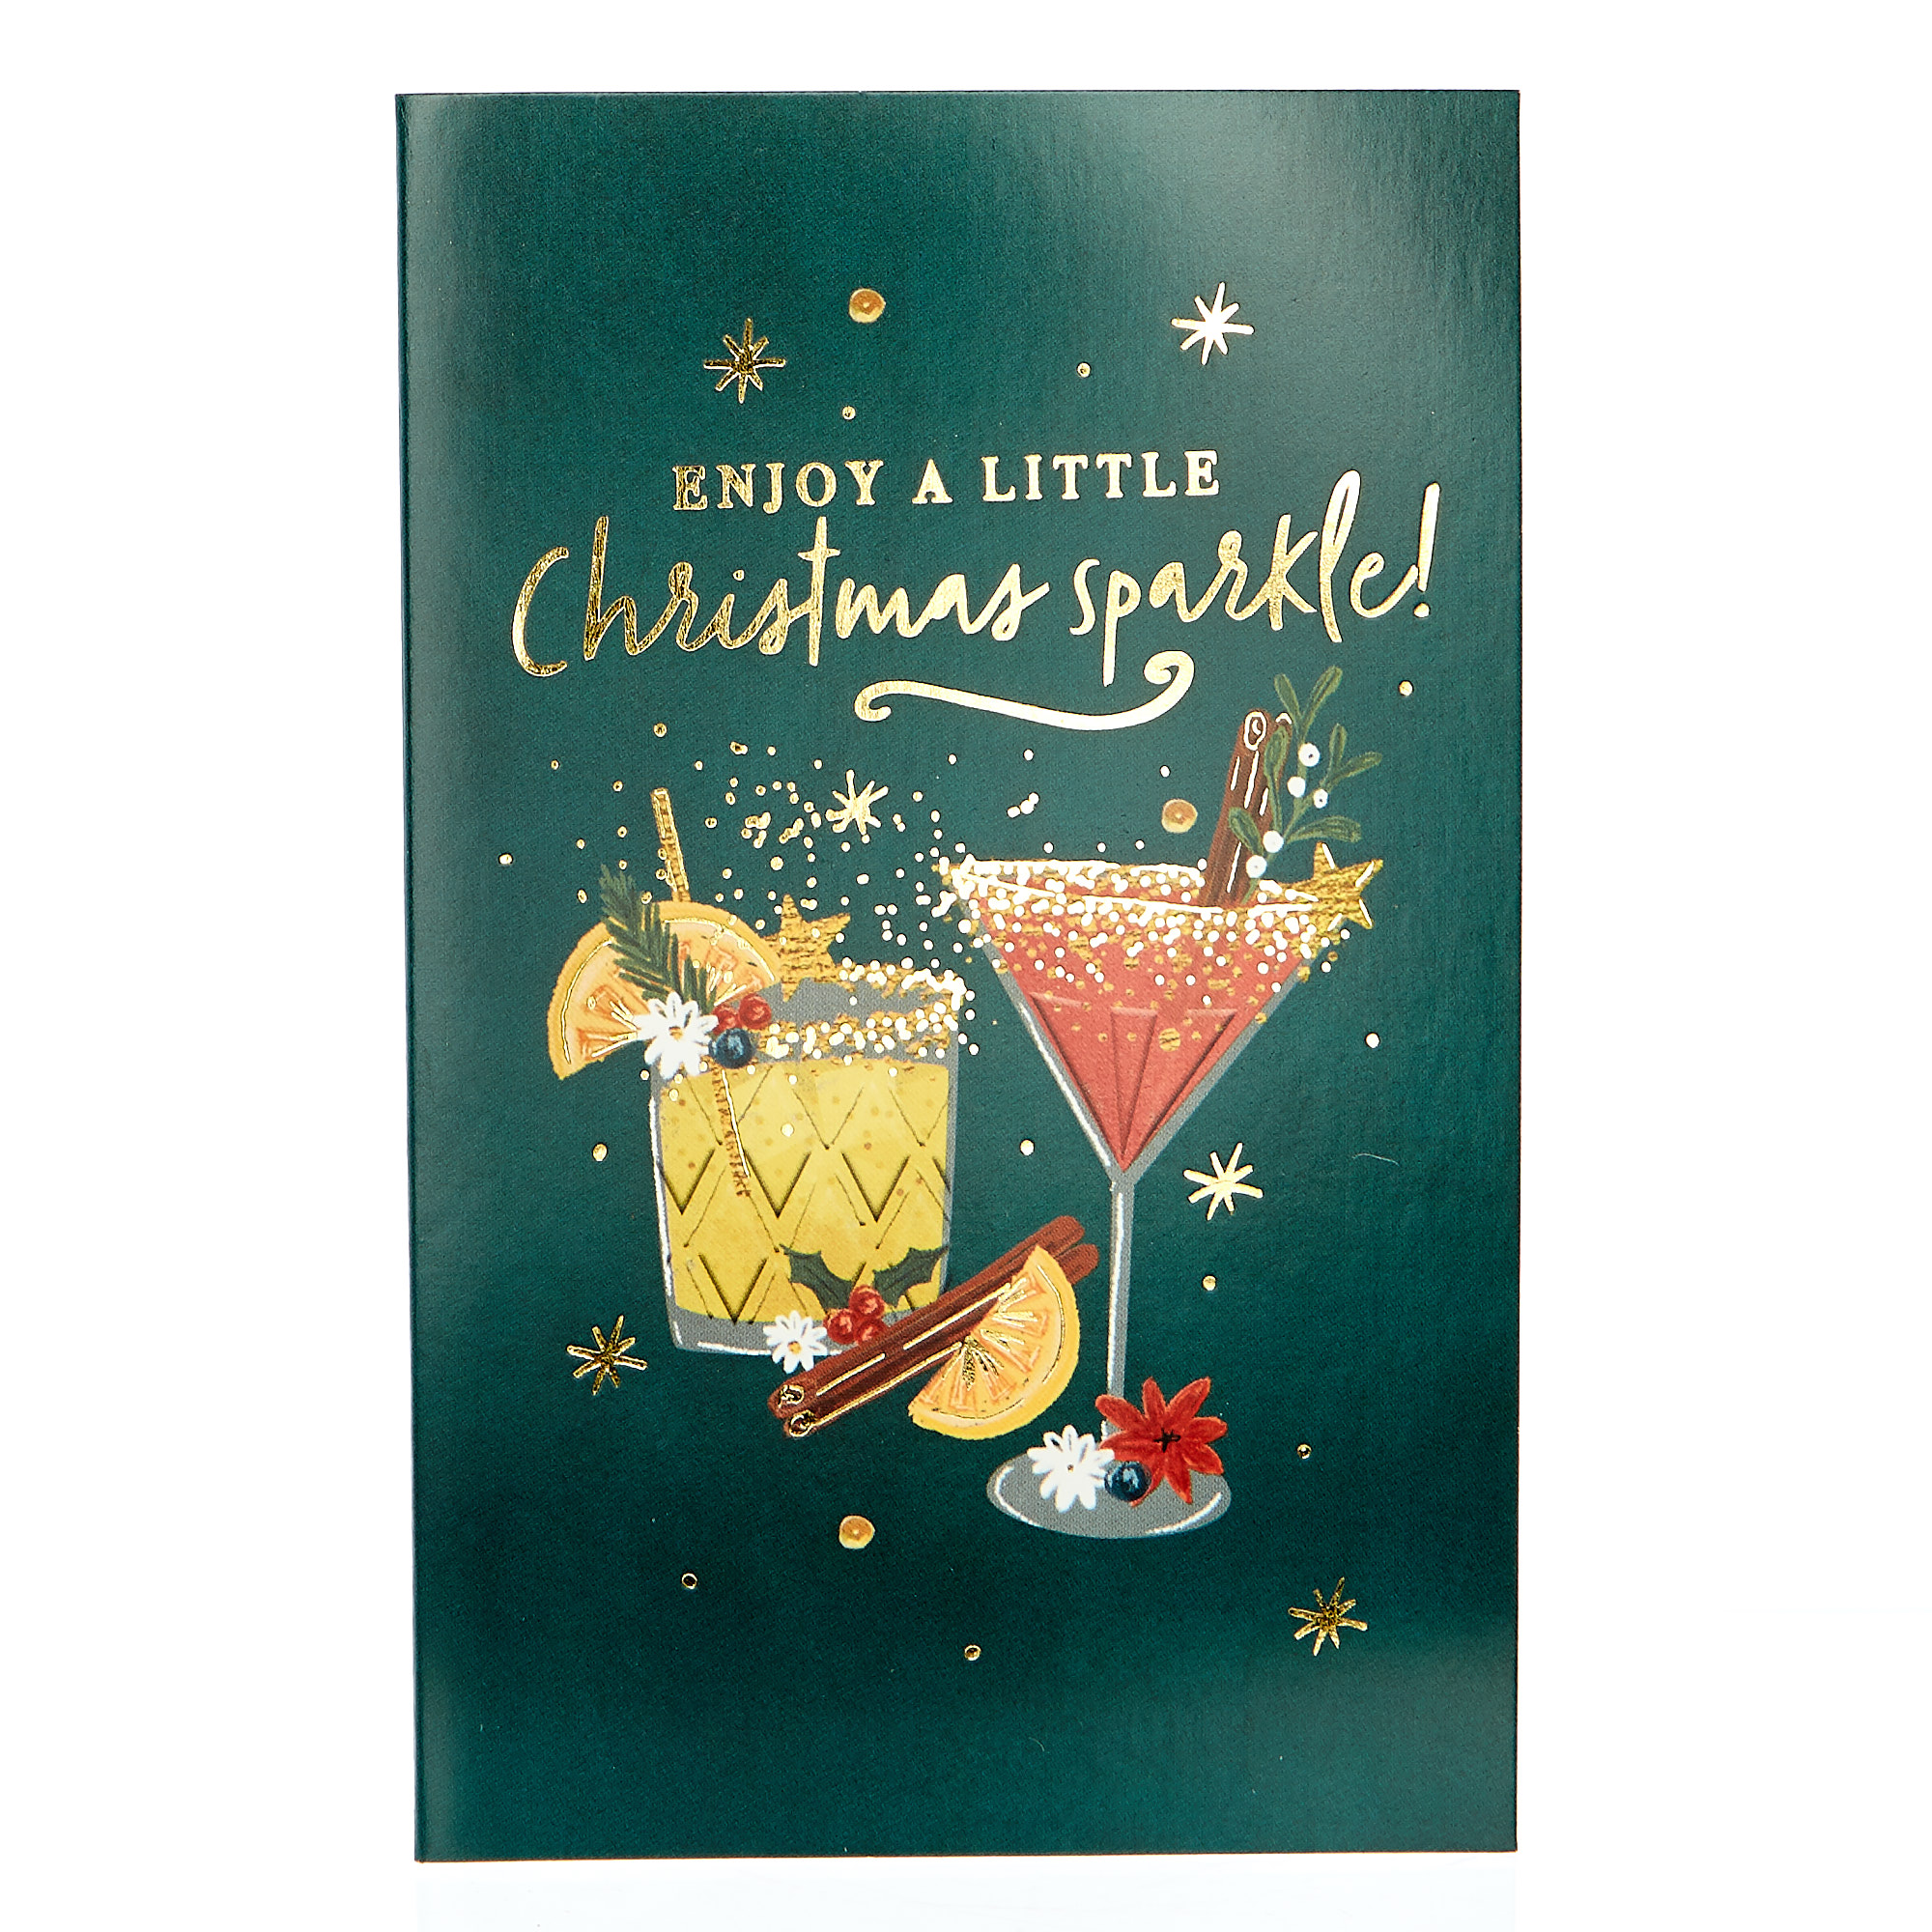 18 Cocktail Charity Christmas Cards - 3 designs